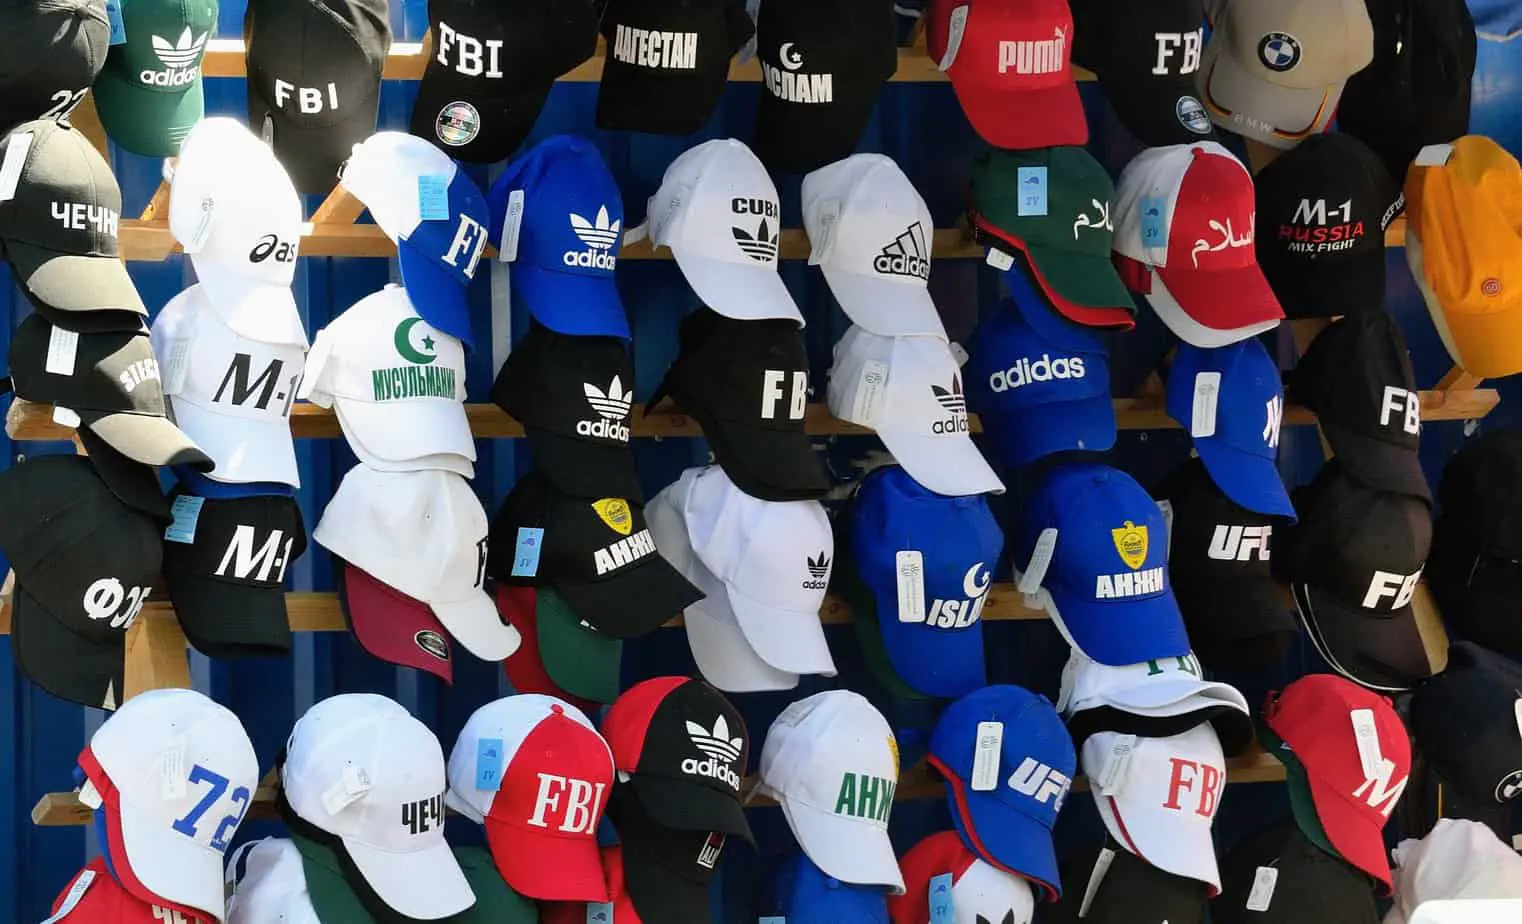 Baseball Caps vs Golf Caps: A Closer Look at Their Differences